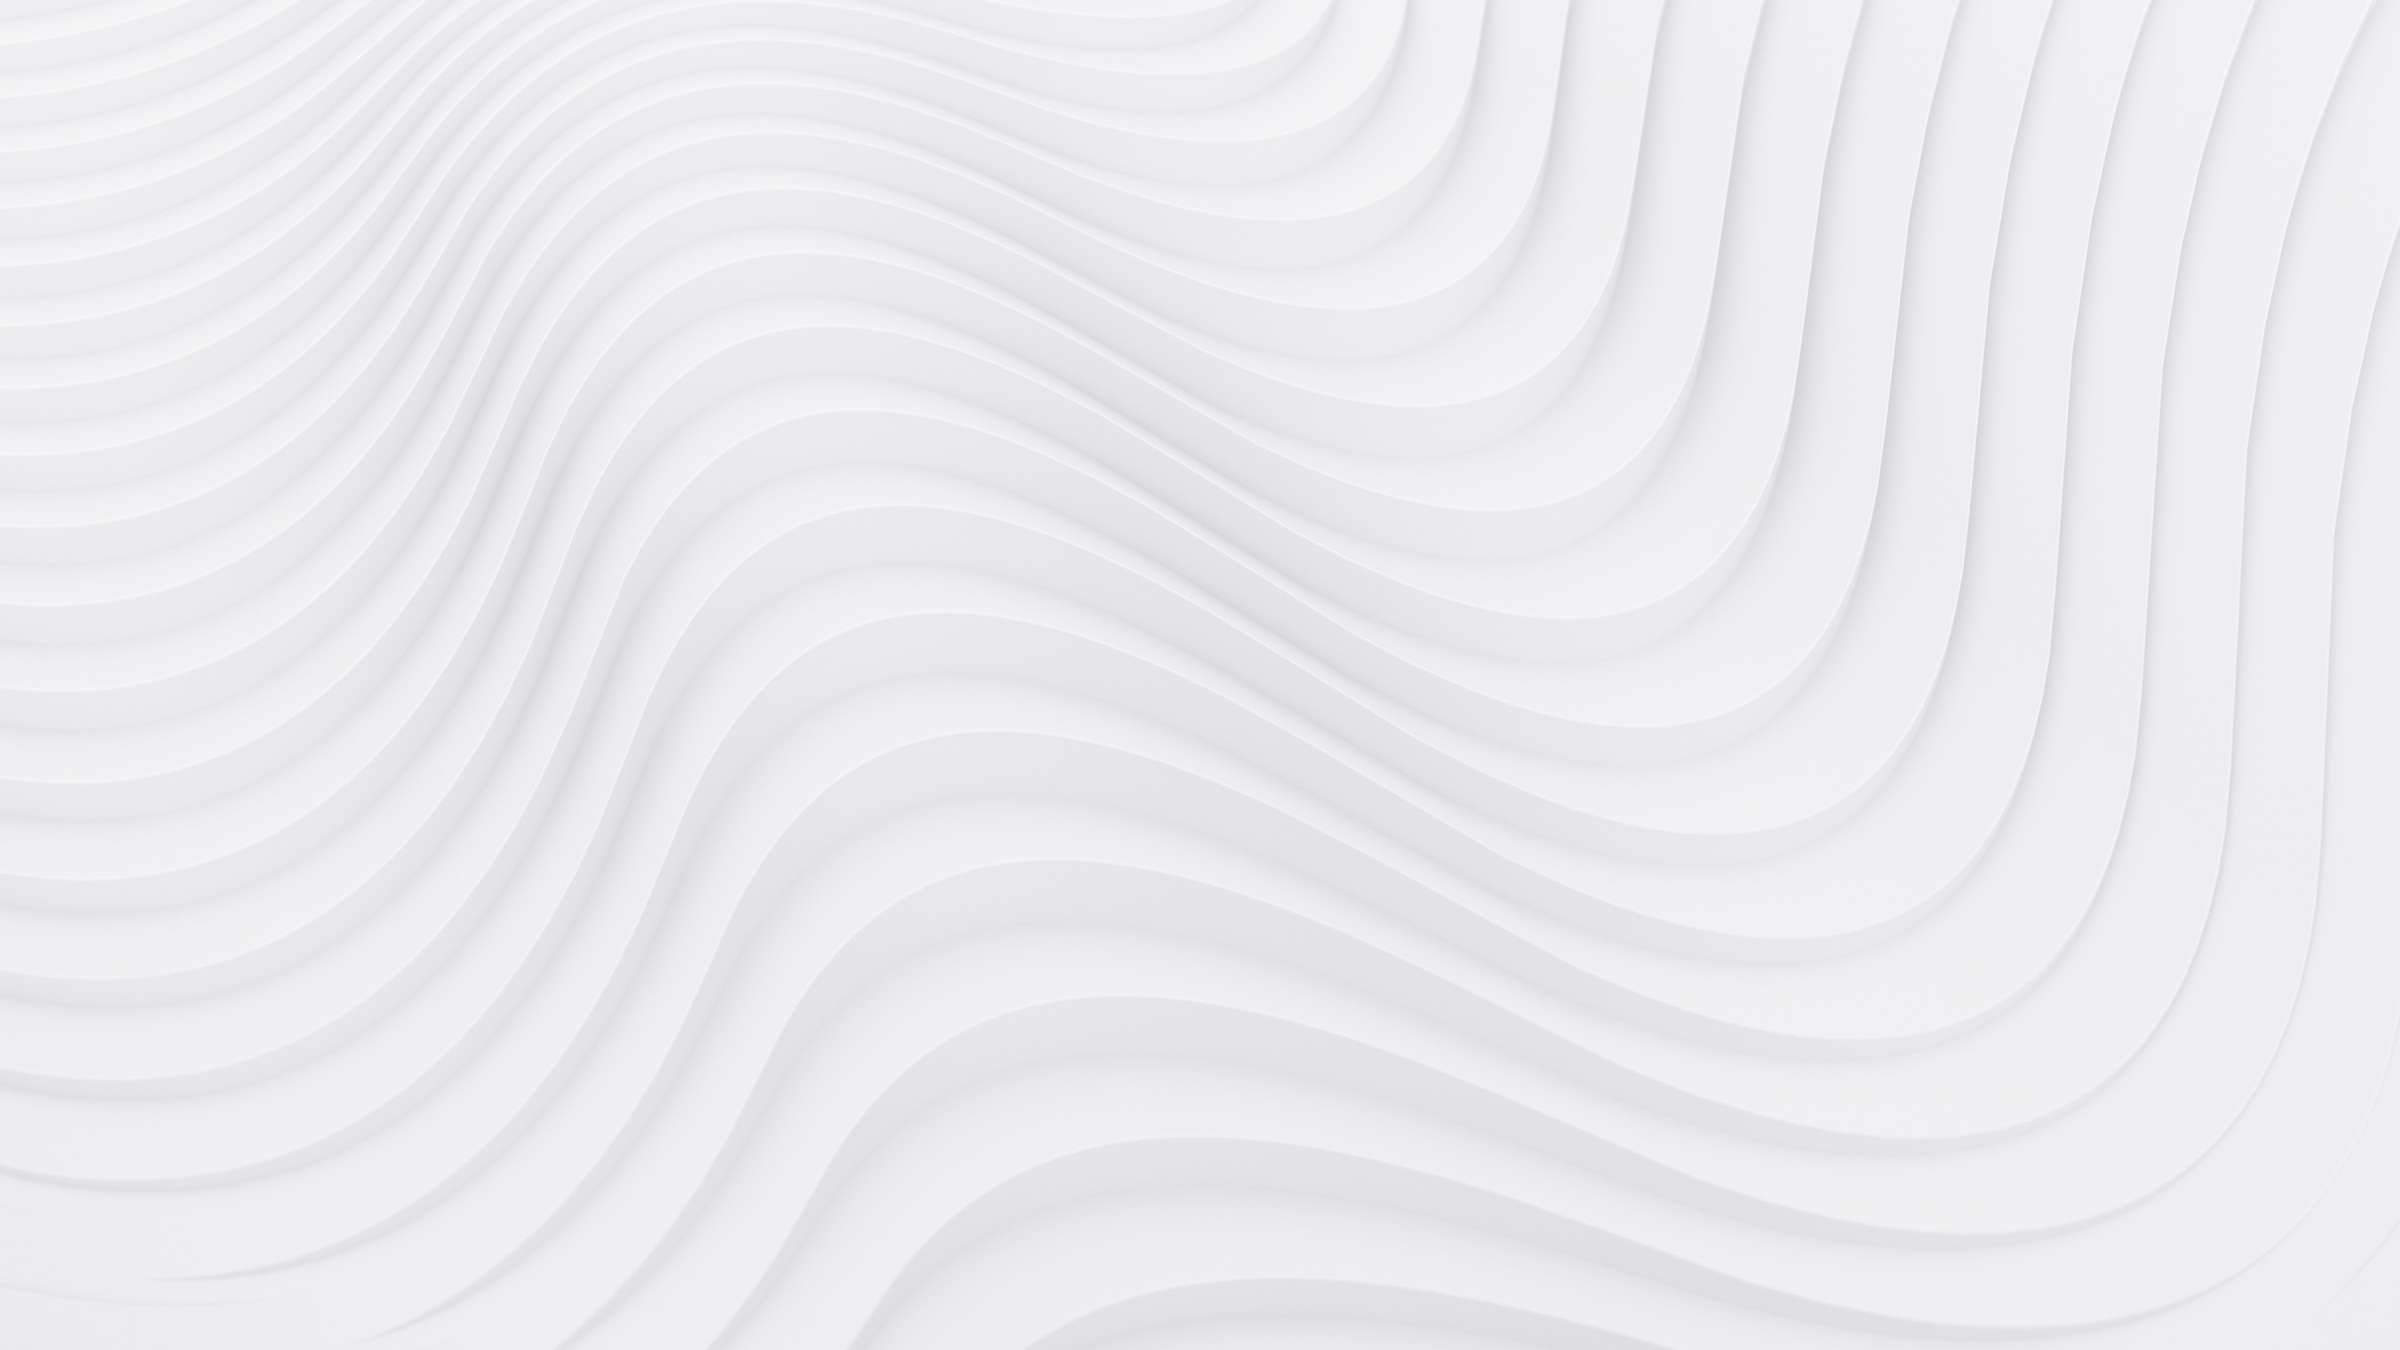 Background image: Foresight Ripples 2